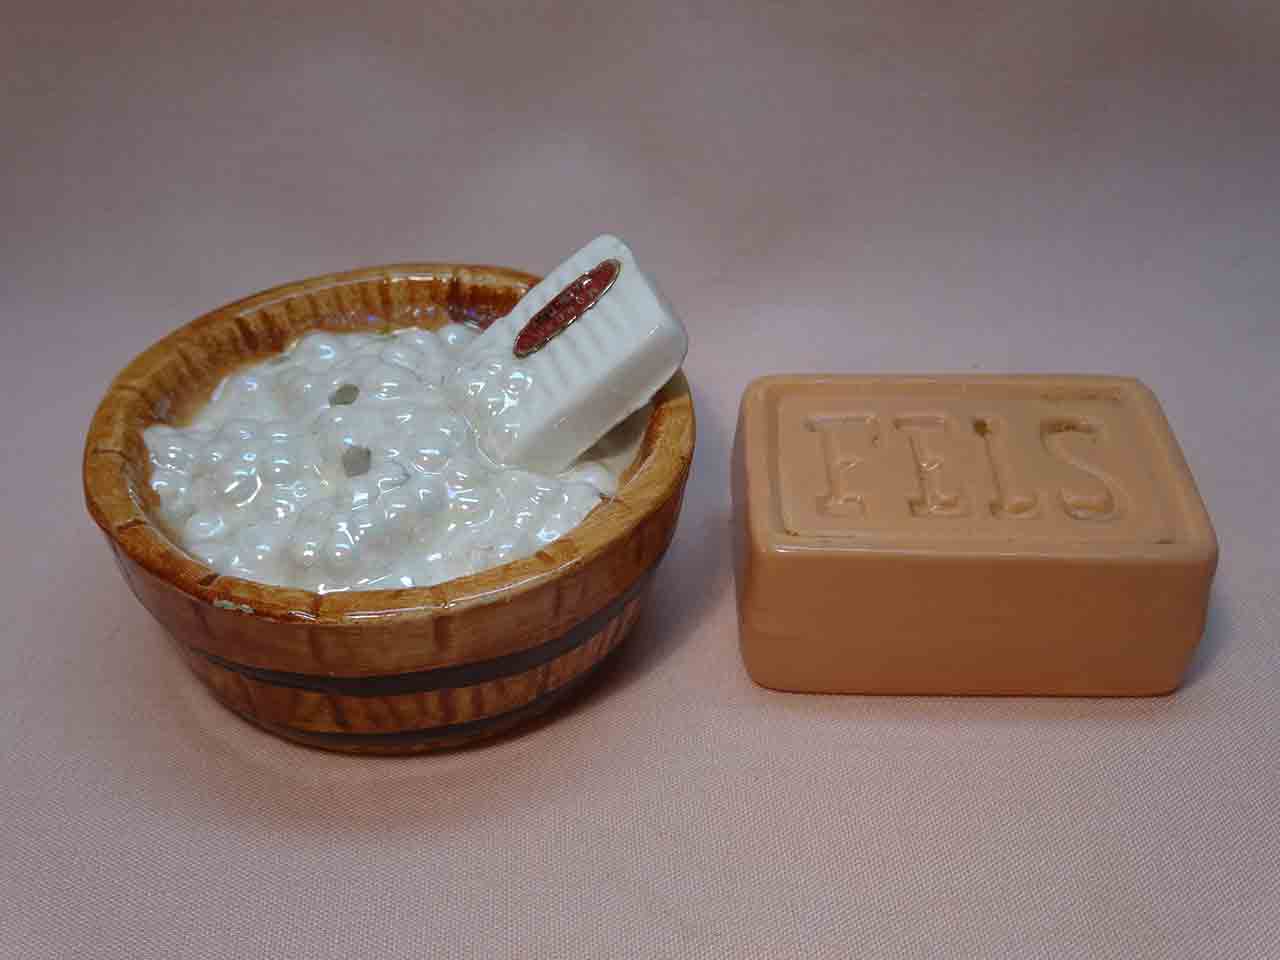 Enesco Seven Days of the Week salt and pepper shakers series - Monday washing day bar of soap and washtub